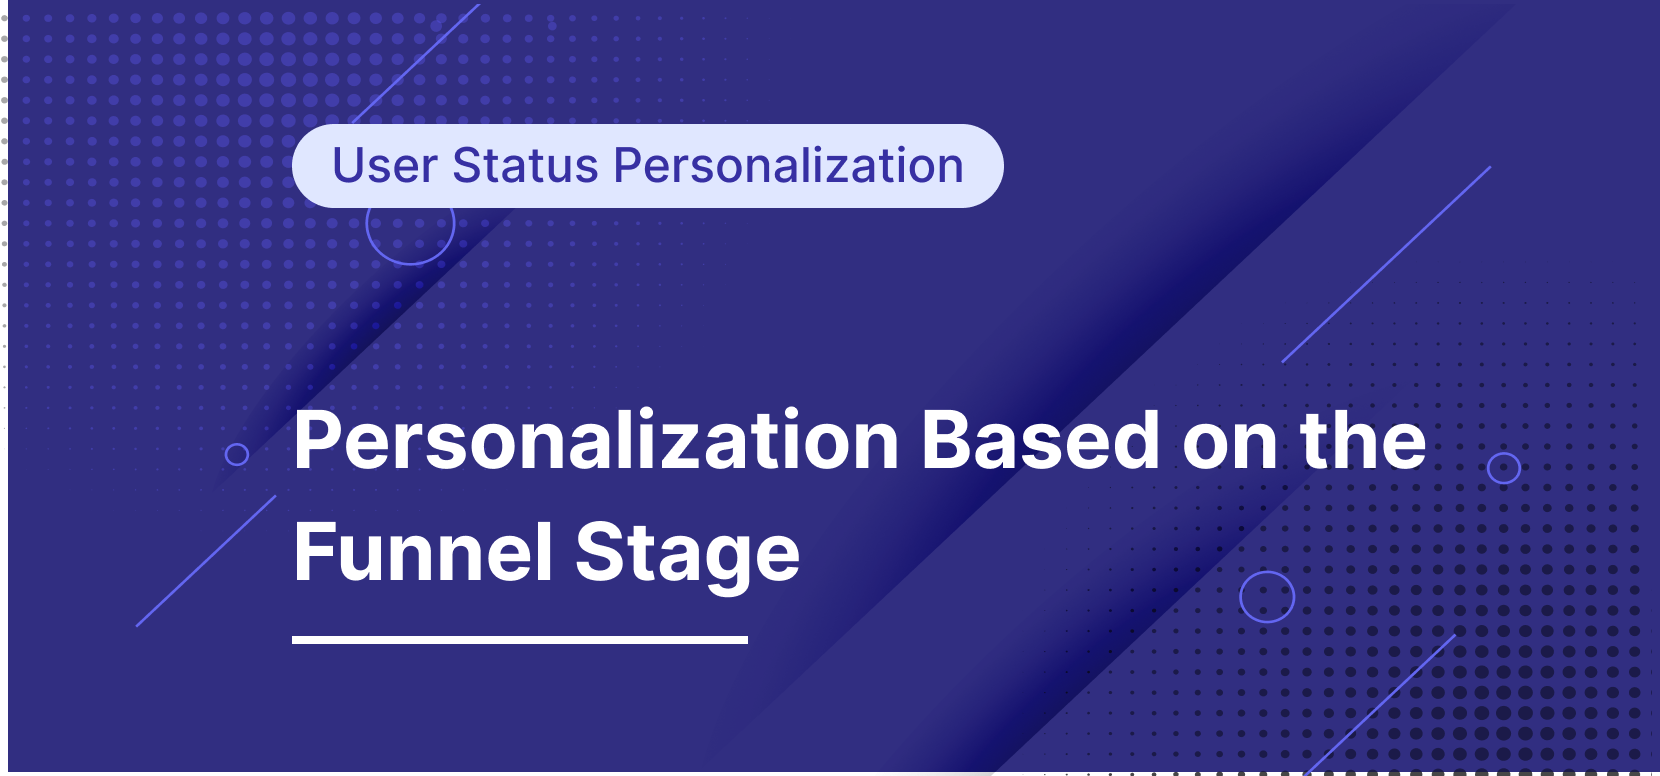 How to Personalize the User Experience Based on the Funnel Stage